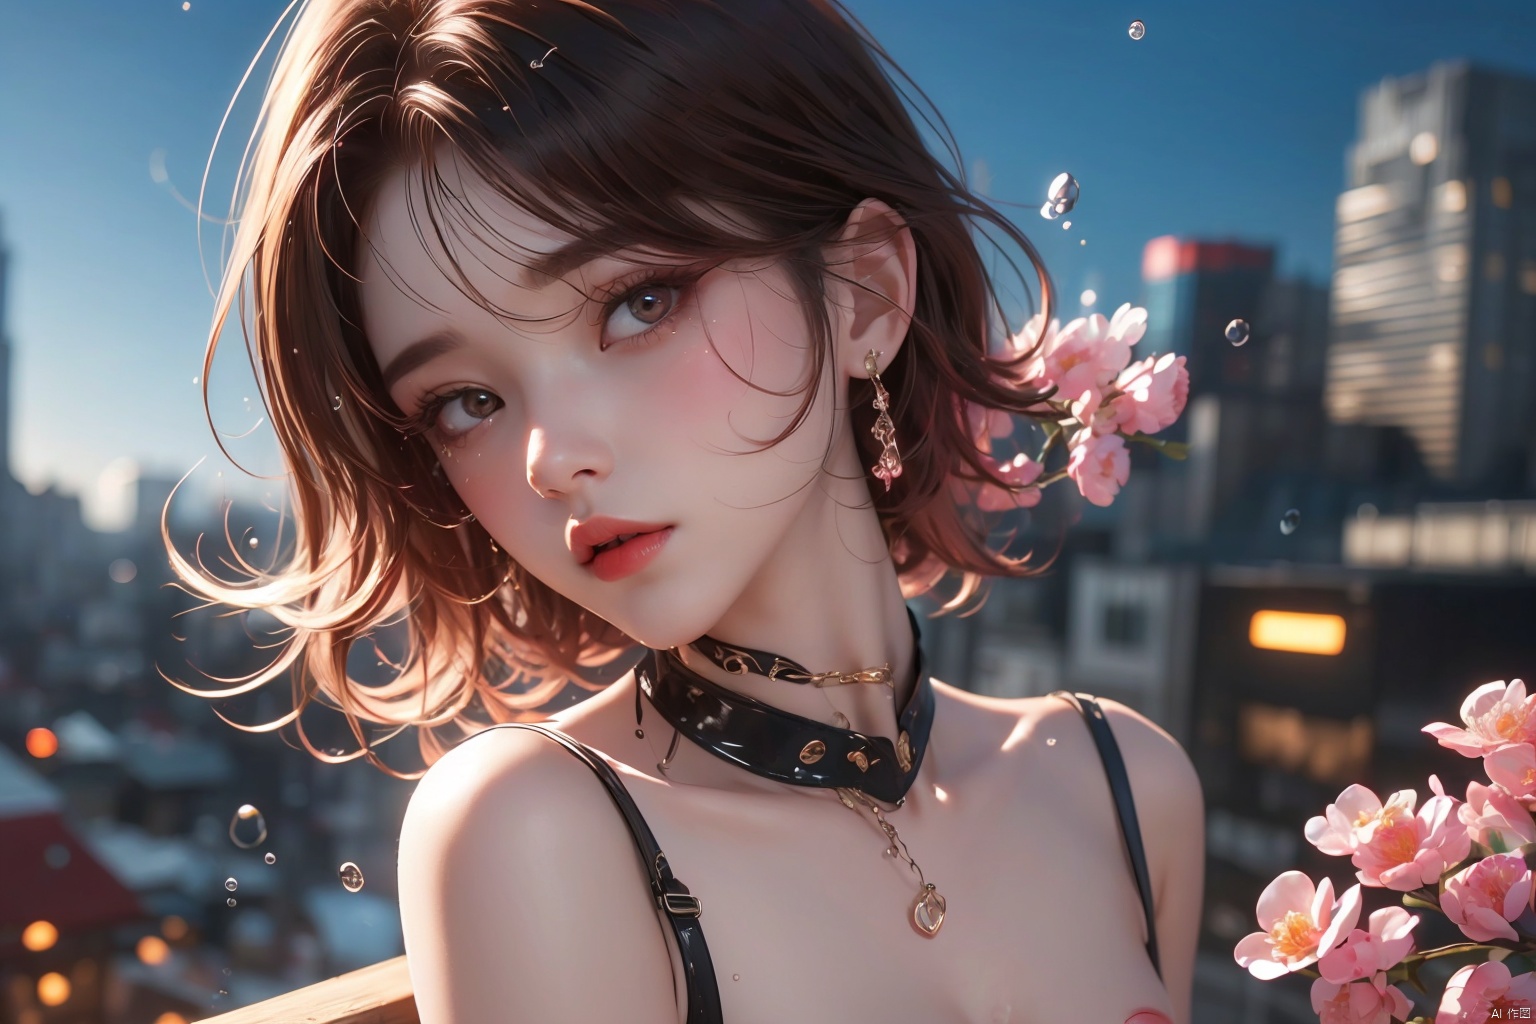  KK-Comic Style,looking at viewer,bangs,lips,makeup,on bed,red lips,peach blossom eye,pink hair,crop_top,skirt,night_sky,rooftop,city,neon lights,highly detailed,ultra-high resolutions,32K UHD,best quality,masterpiece,

1girl\((bishoujo), (lovely face:1.6), (reddish black hair:1.6), (browneyes:1.6), (small breast:1.8), (straight_hair:1.4), (short_hair:1.4), plump_*****, (hairless:1.2), long_legs, sharp_eyelid, black eyeliner, black eyelashes, reddish eyeshadow, (perfect detailed face), (pink lipgloss:1.3), (perfect hands)\),
(cry:1.4), (grimace:1.4),(full_body:1.2),
water drop,water, partiallysubmerged,flower,airbubble